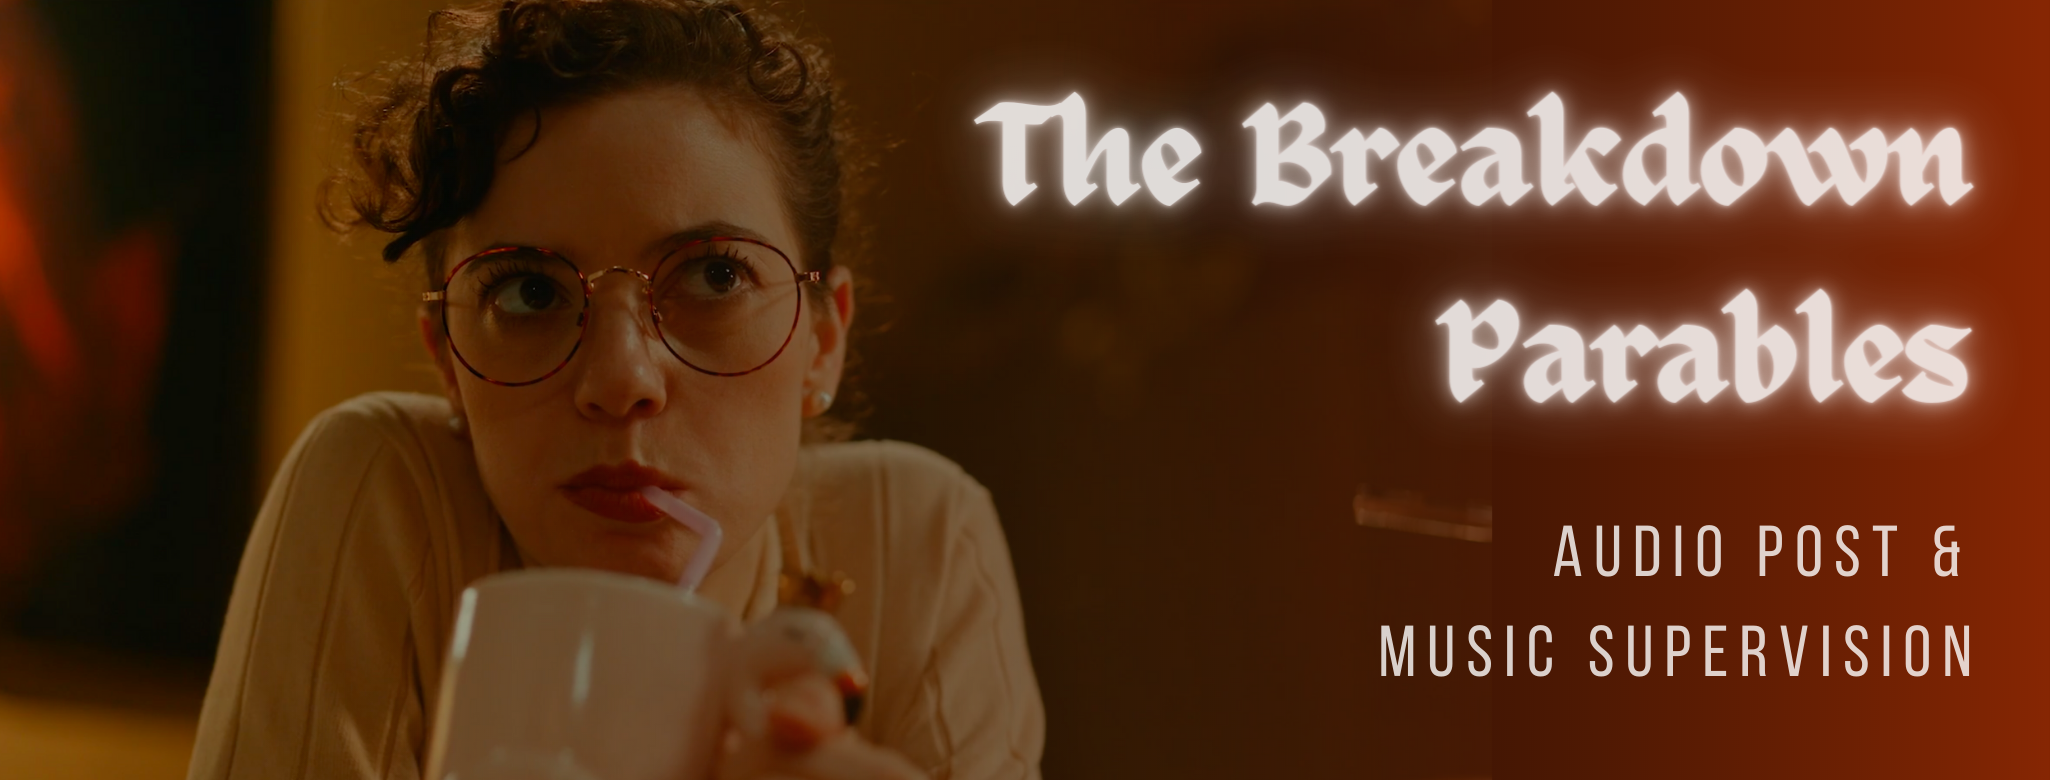 Still from the short film, The Breakdown Parables, directed by Emil Benjamin of Irrelevant Media. The image features the film's audition room receptionist wearing a white shirt and round glasses sipping out of a mug with a straw and staring annoyed into the existence. Flavorlab Sound provided sound design and mix to the film. Producer's Toolbox provided music supervision for the film.